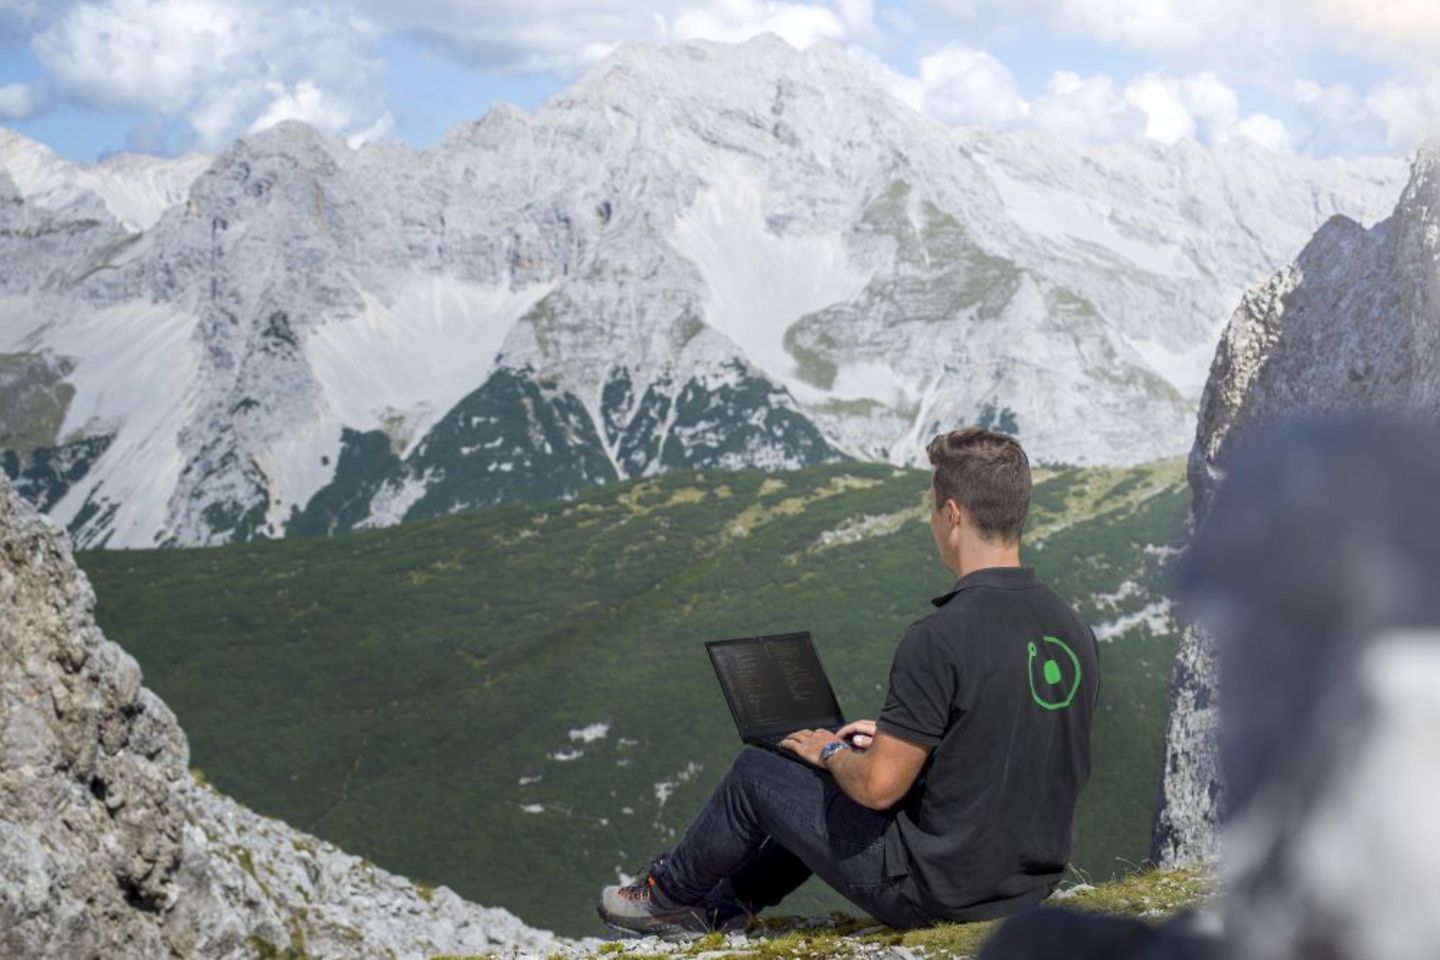 Man sits with laptop in front of mountain scenery